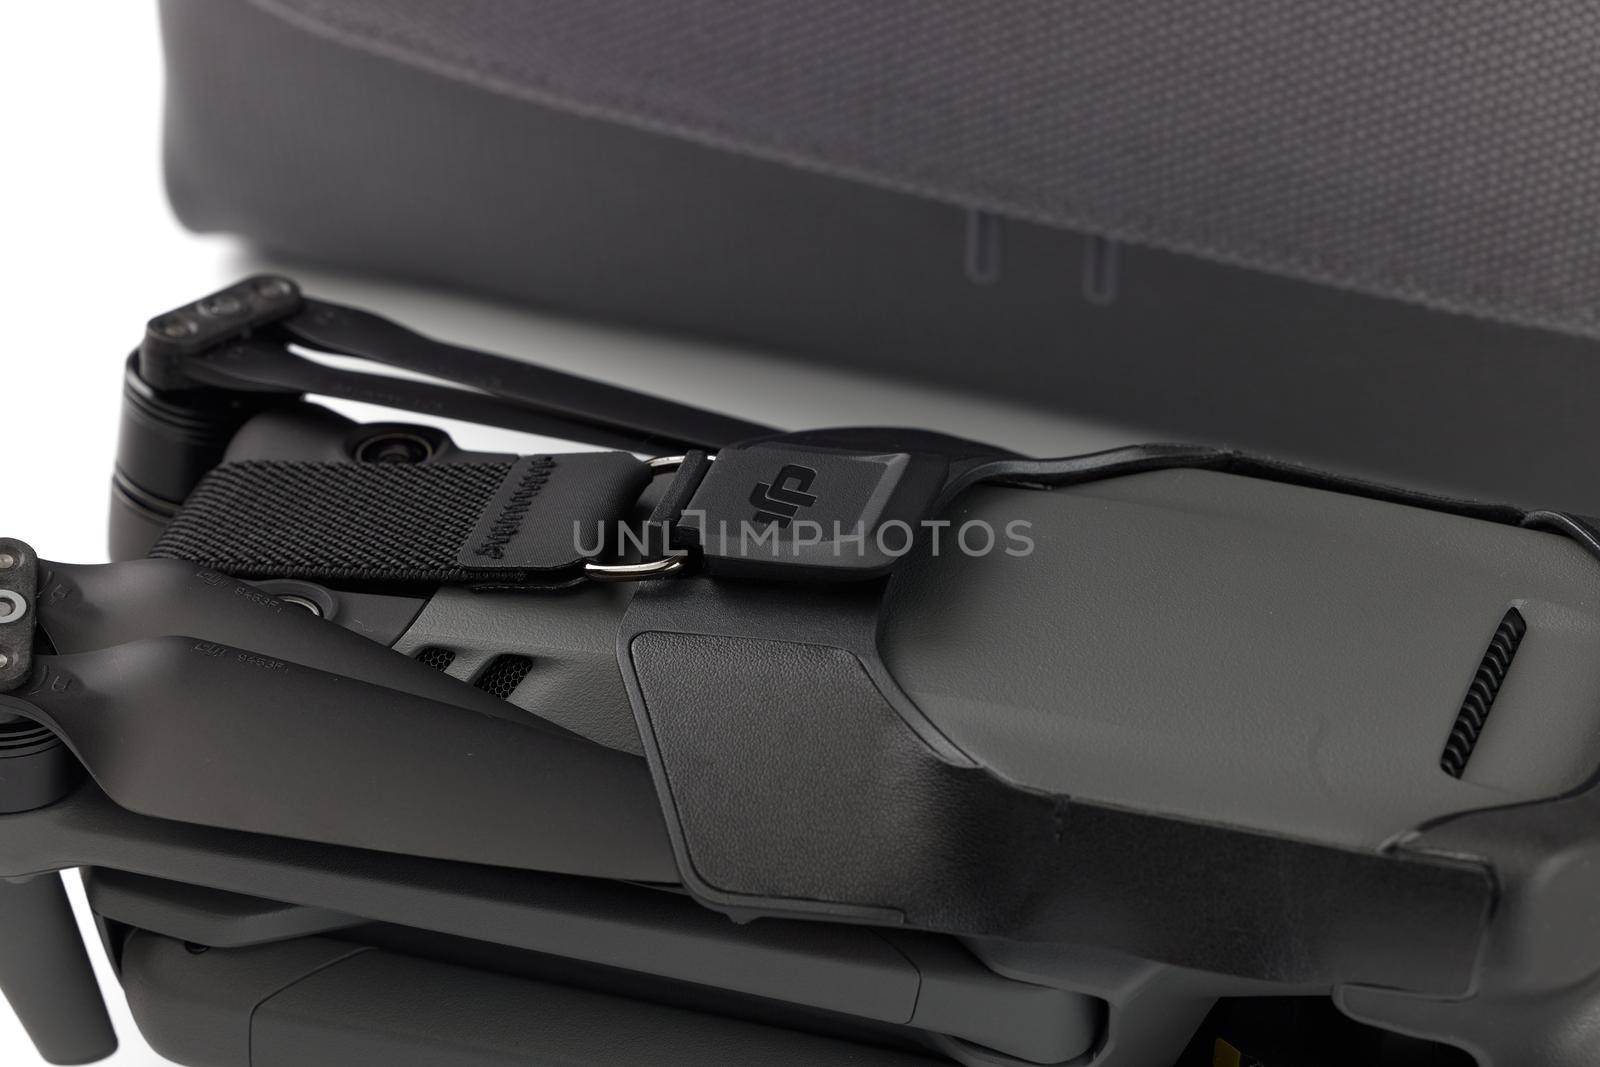 New DJI Mavic 3 drone on a white background when unpacking. Details of the new copter close-up. DJI world leader developer and manufacturers in UA. 17.12.2021, Rostov region, Russia.